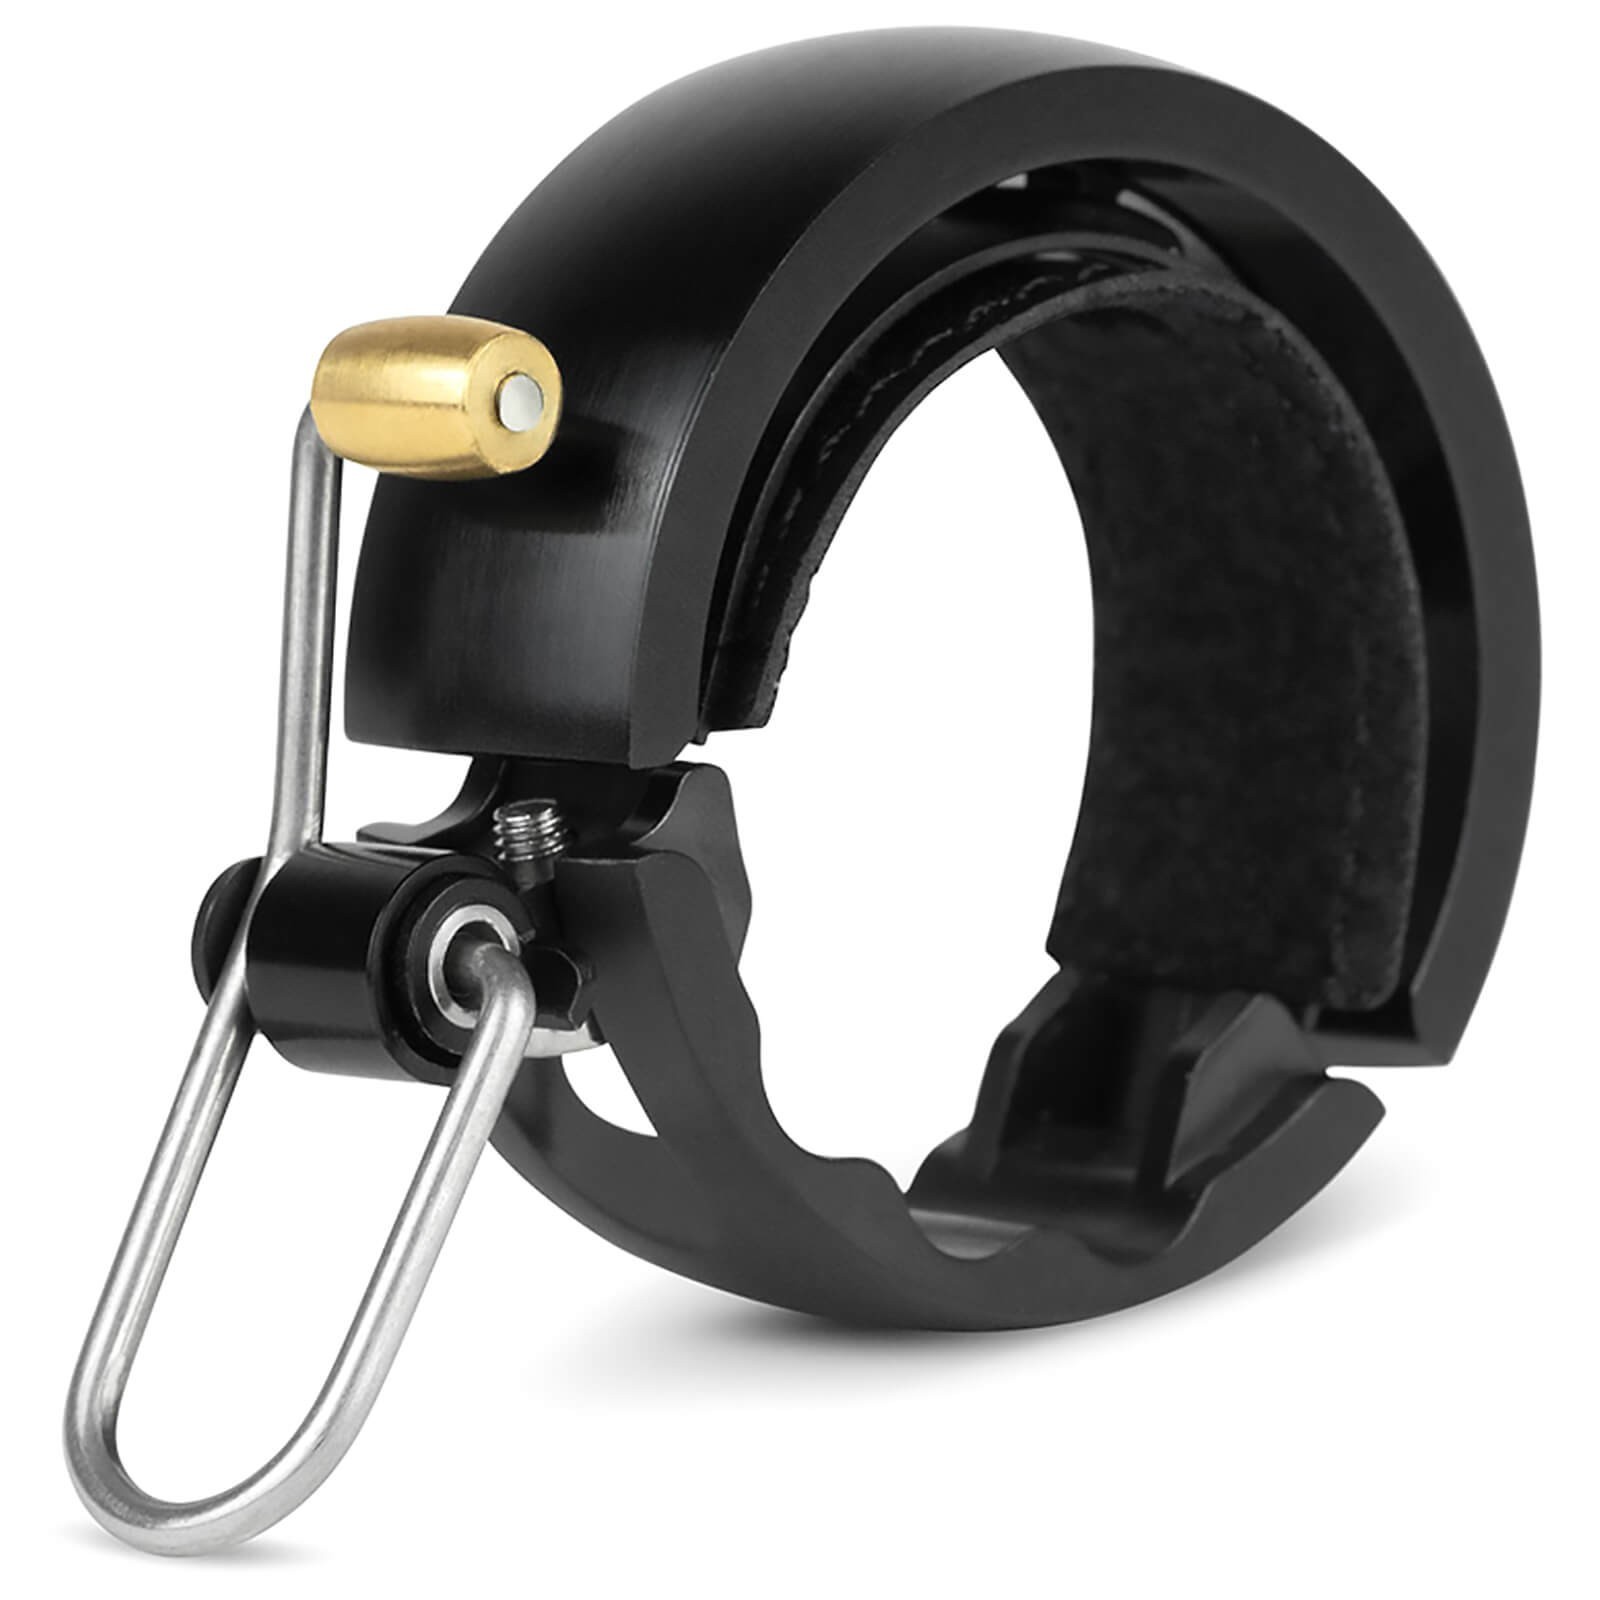 Knog Oi Deluxe Bell